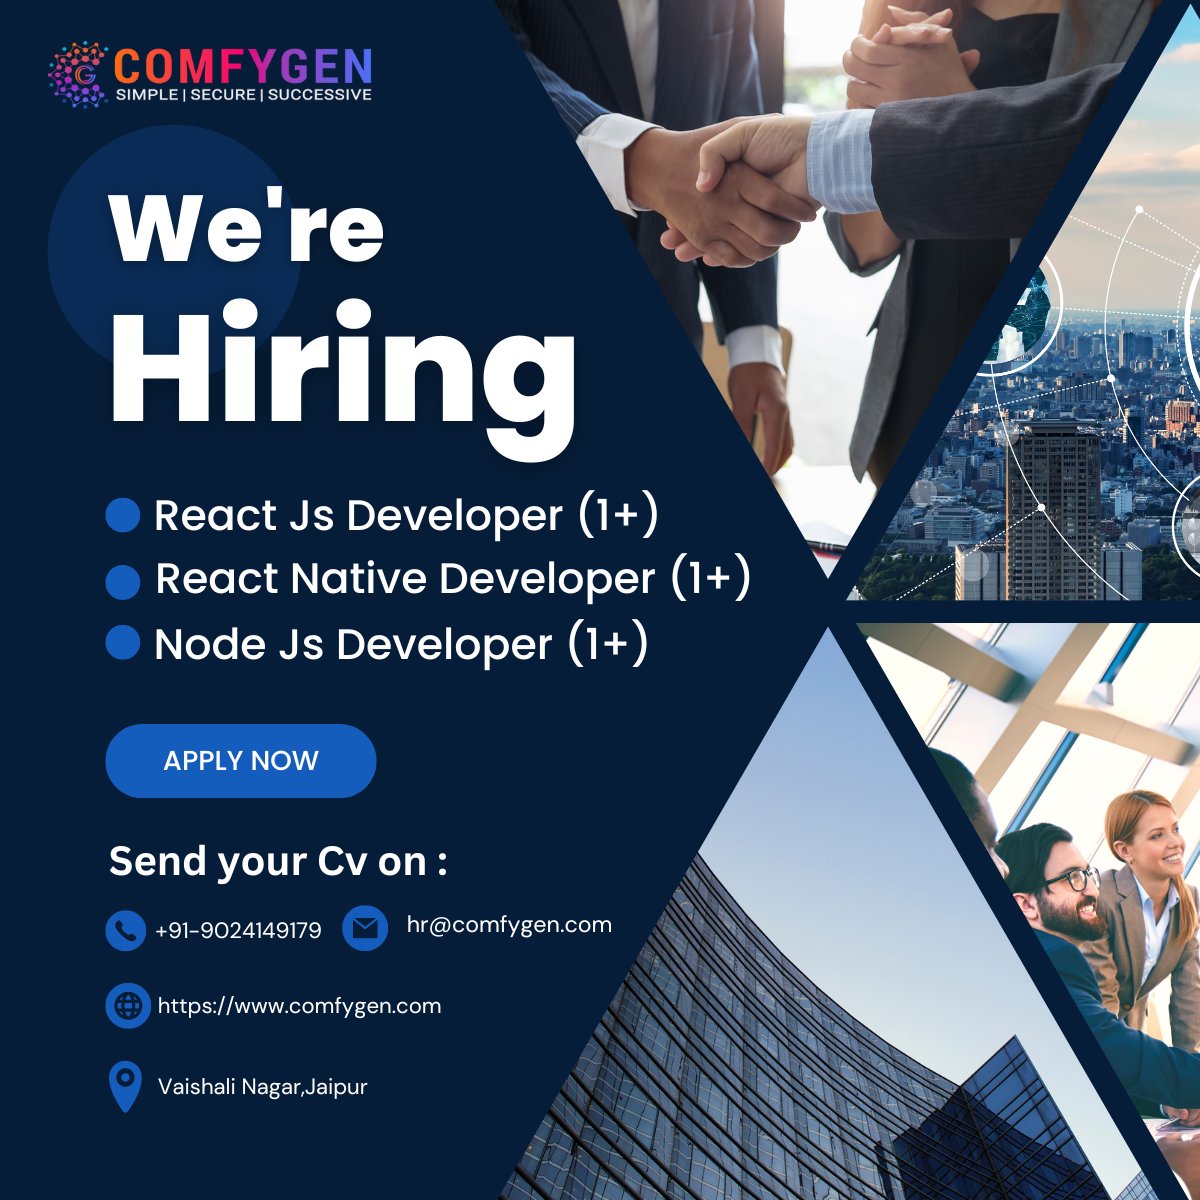 #hiringalert 

We're seeking React Native, React JS, and Node JS developers. Join our innovative team!

Company: @comfygentech 
Location: Jaipur (Work from office)
Experience: 1+ year

#hiringnow #immediatejoiners #hiring #hiringimmediately #jobalert #vacancy #jobvacancies